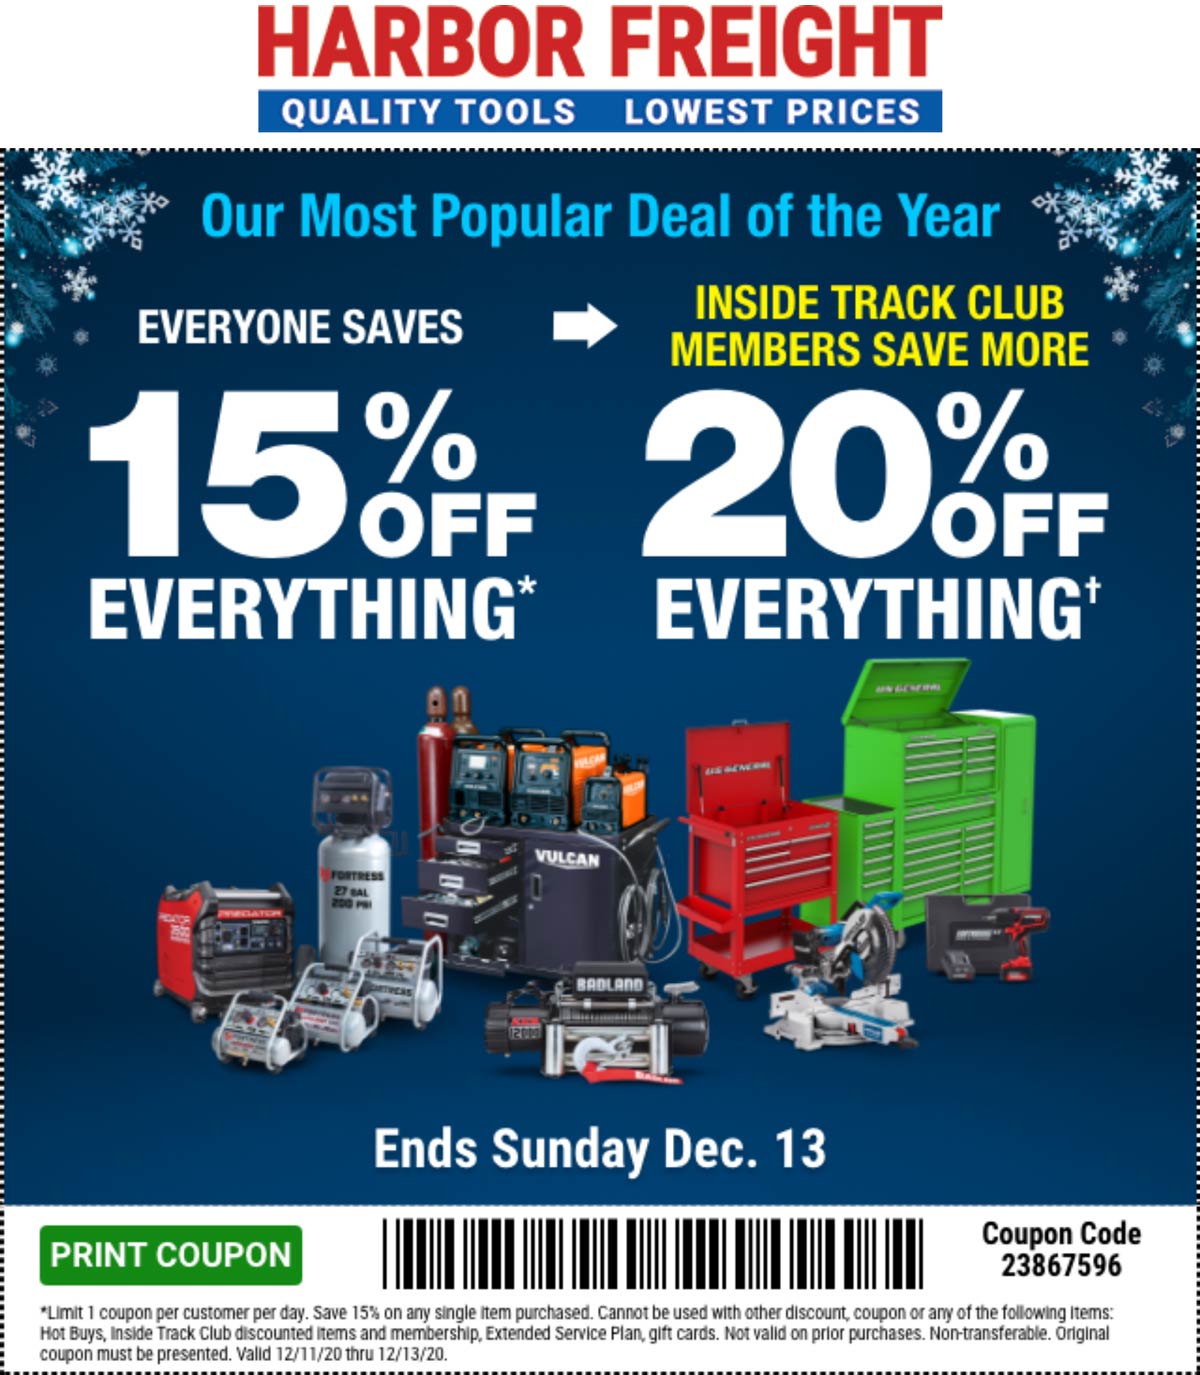 Harbor Freight stores Coupon  15% off everything today at Harbor Freight Tools #harborfreight 